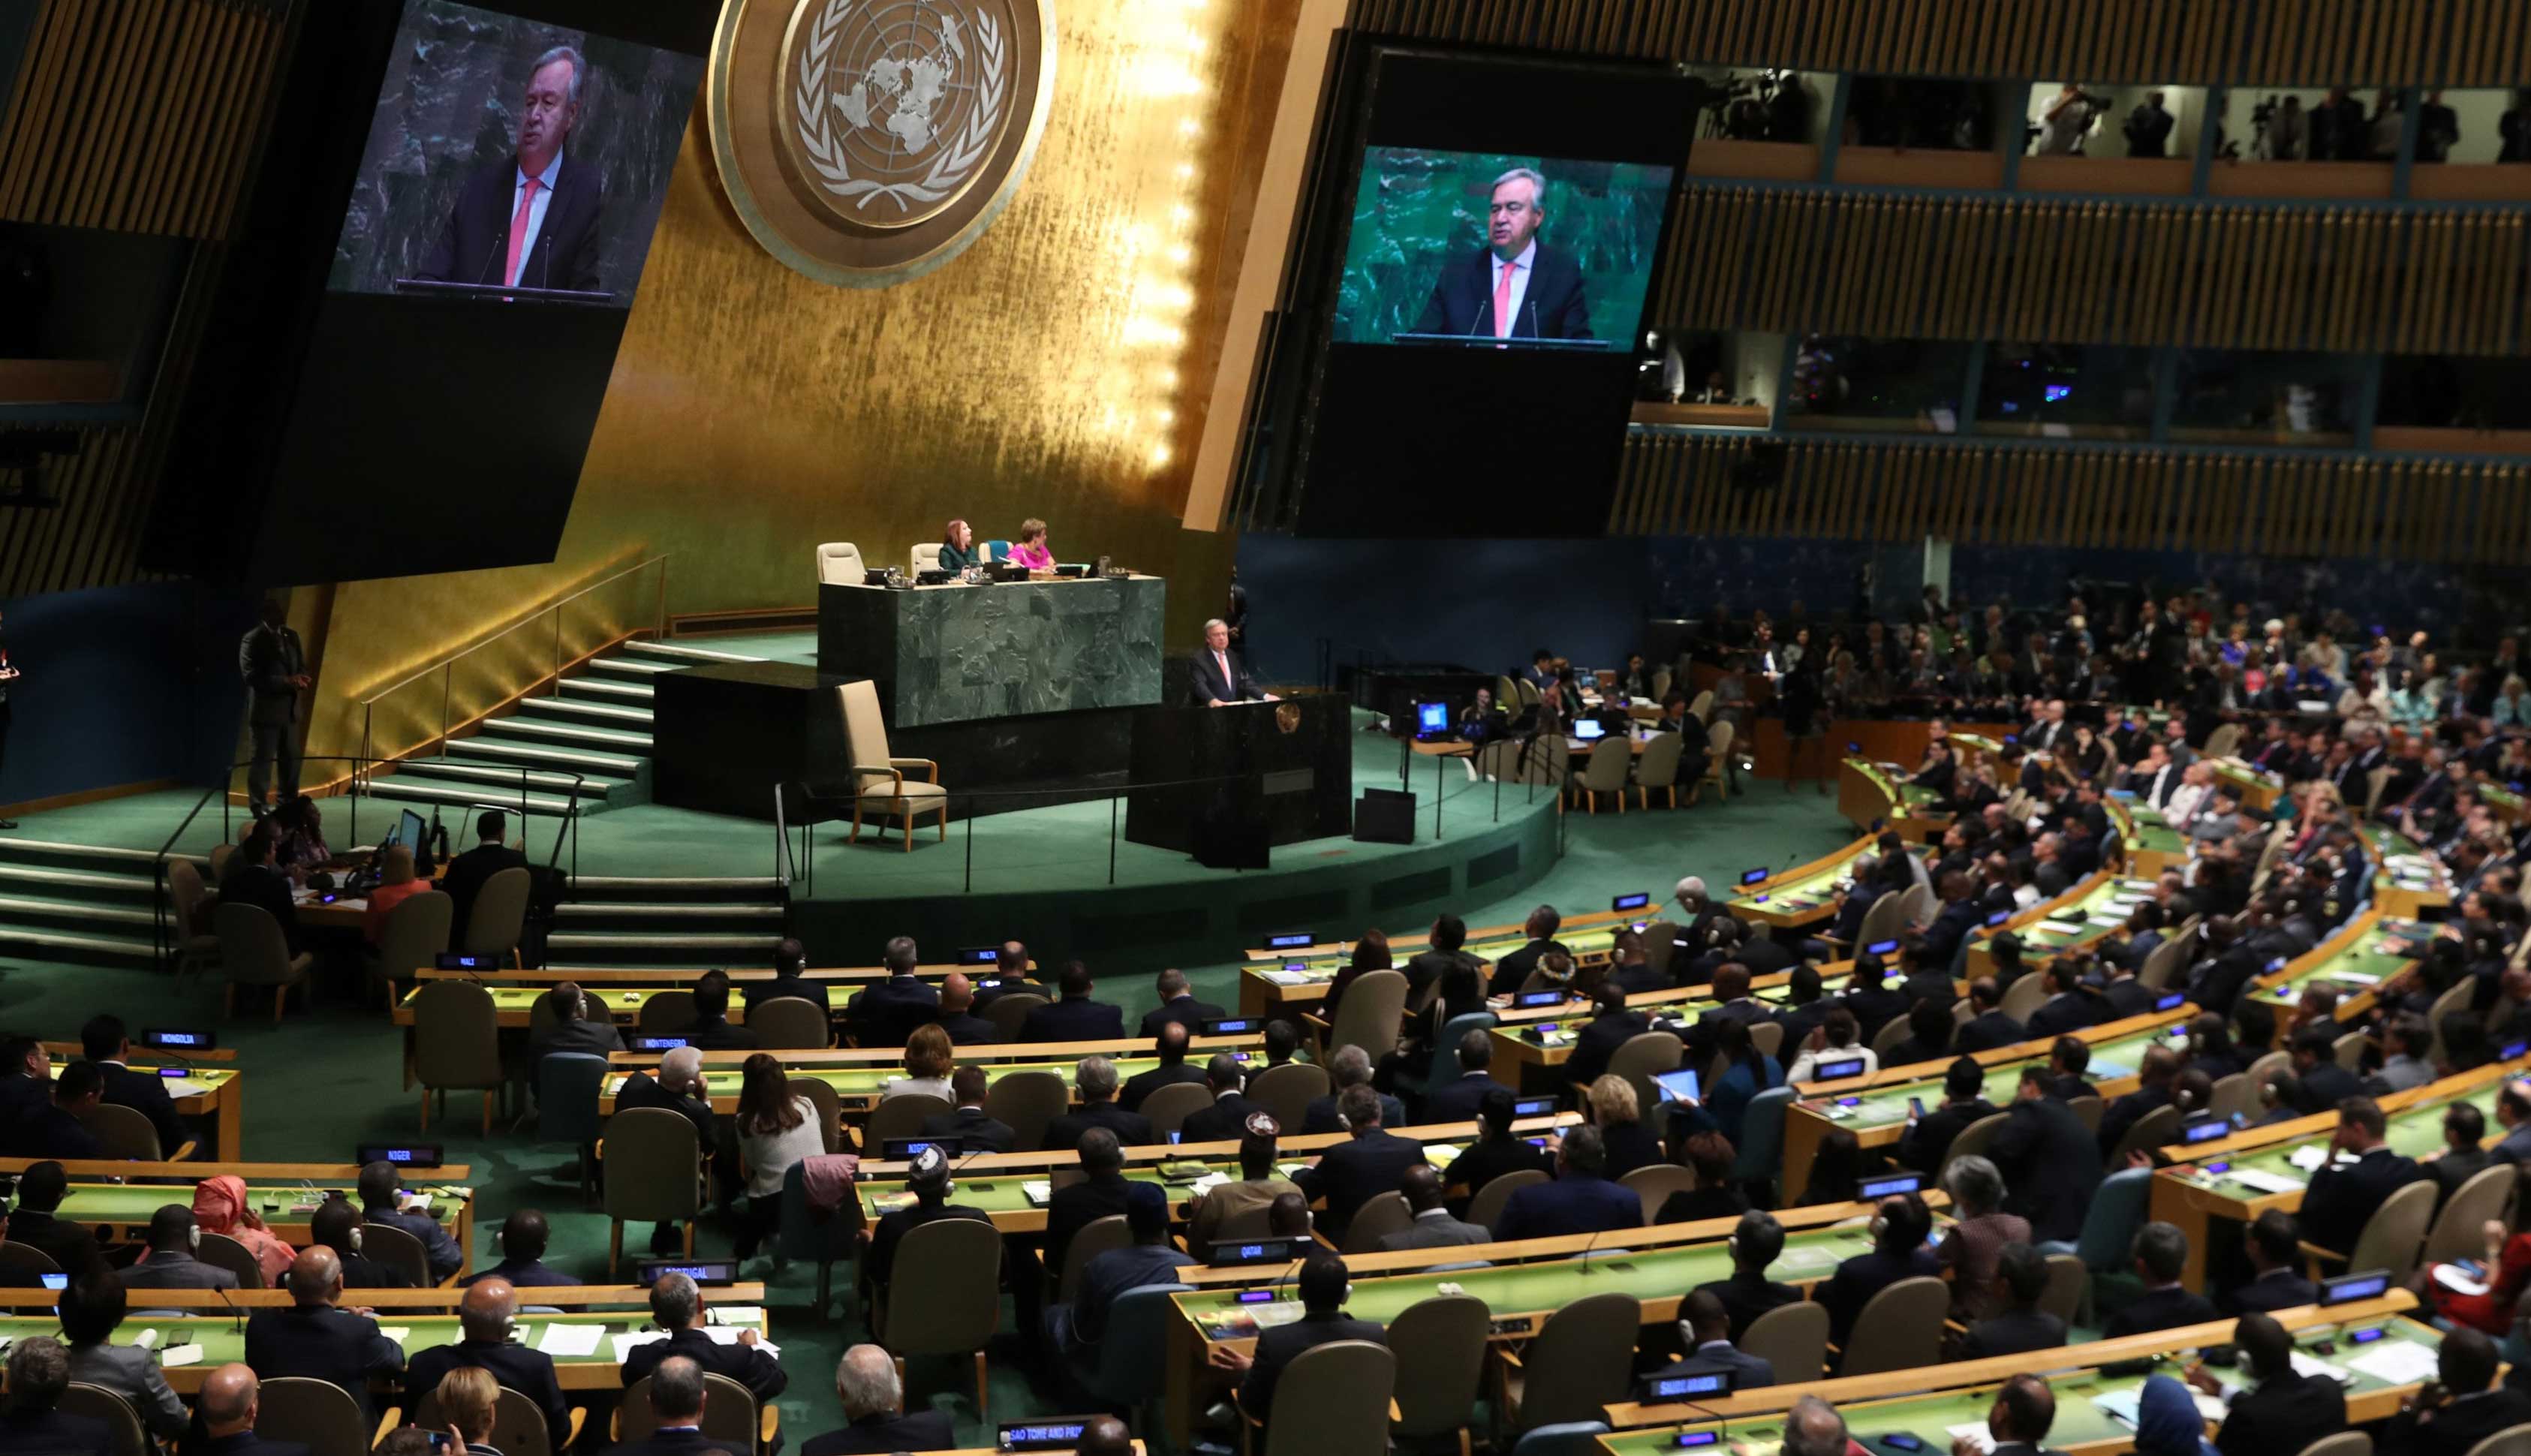 UN chief warns of 'chaotic' world order as 73rd UNGA meeting opens